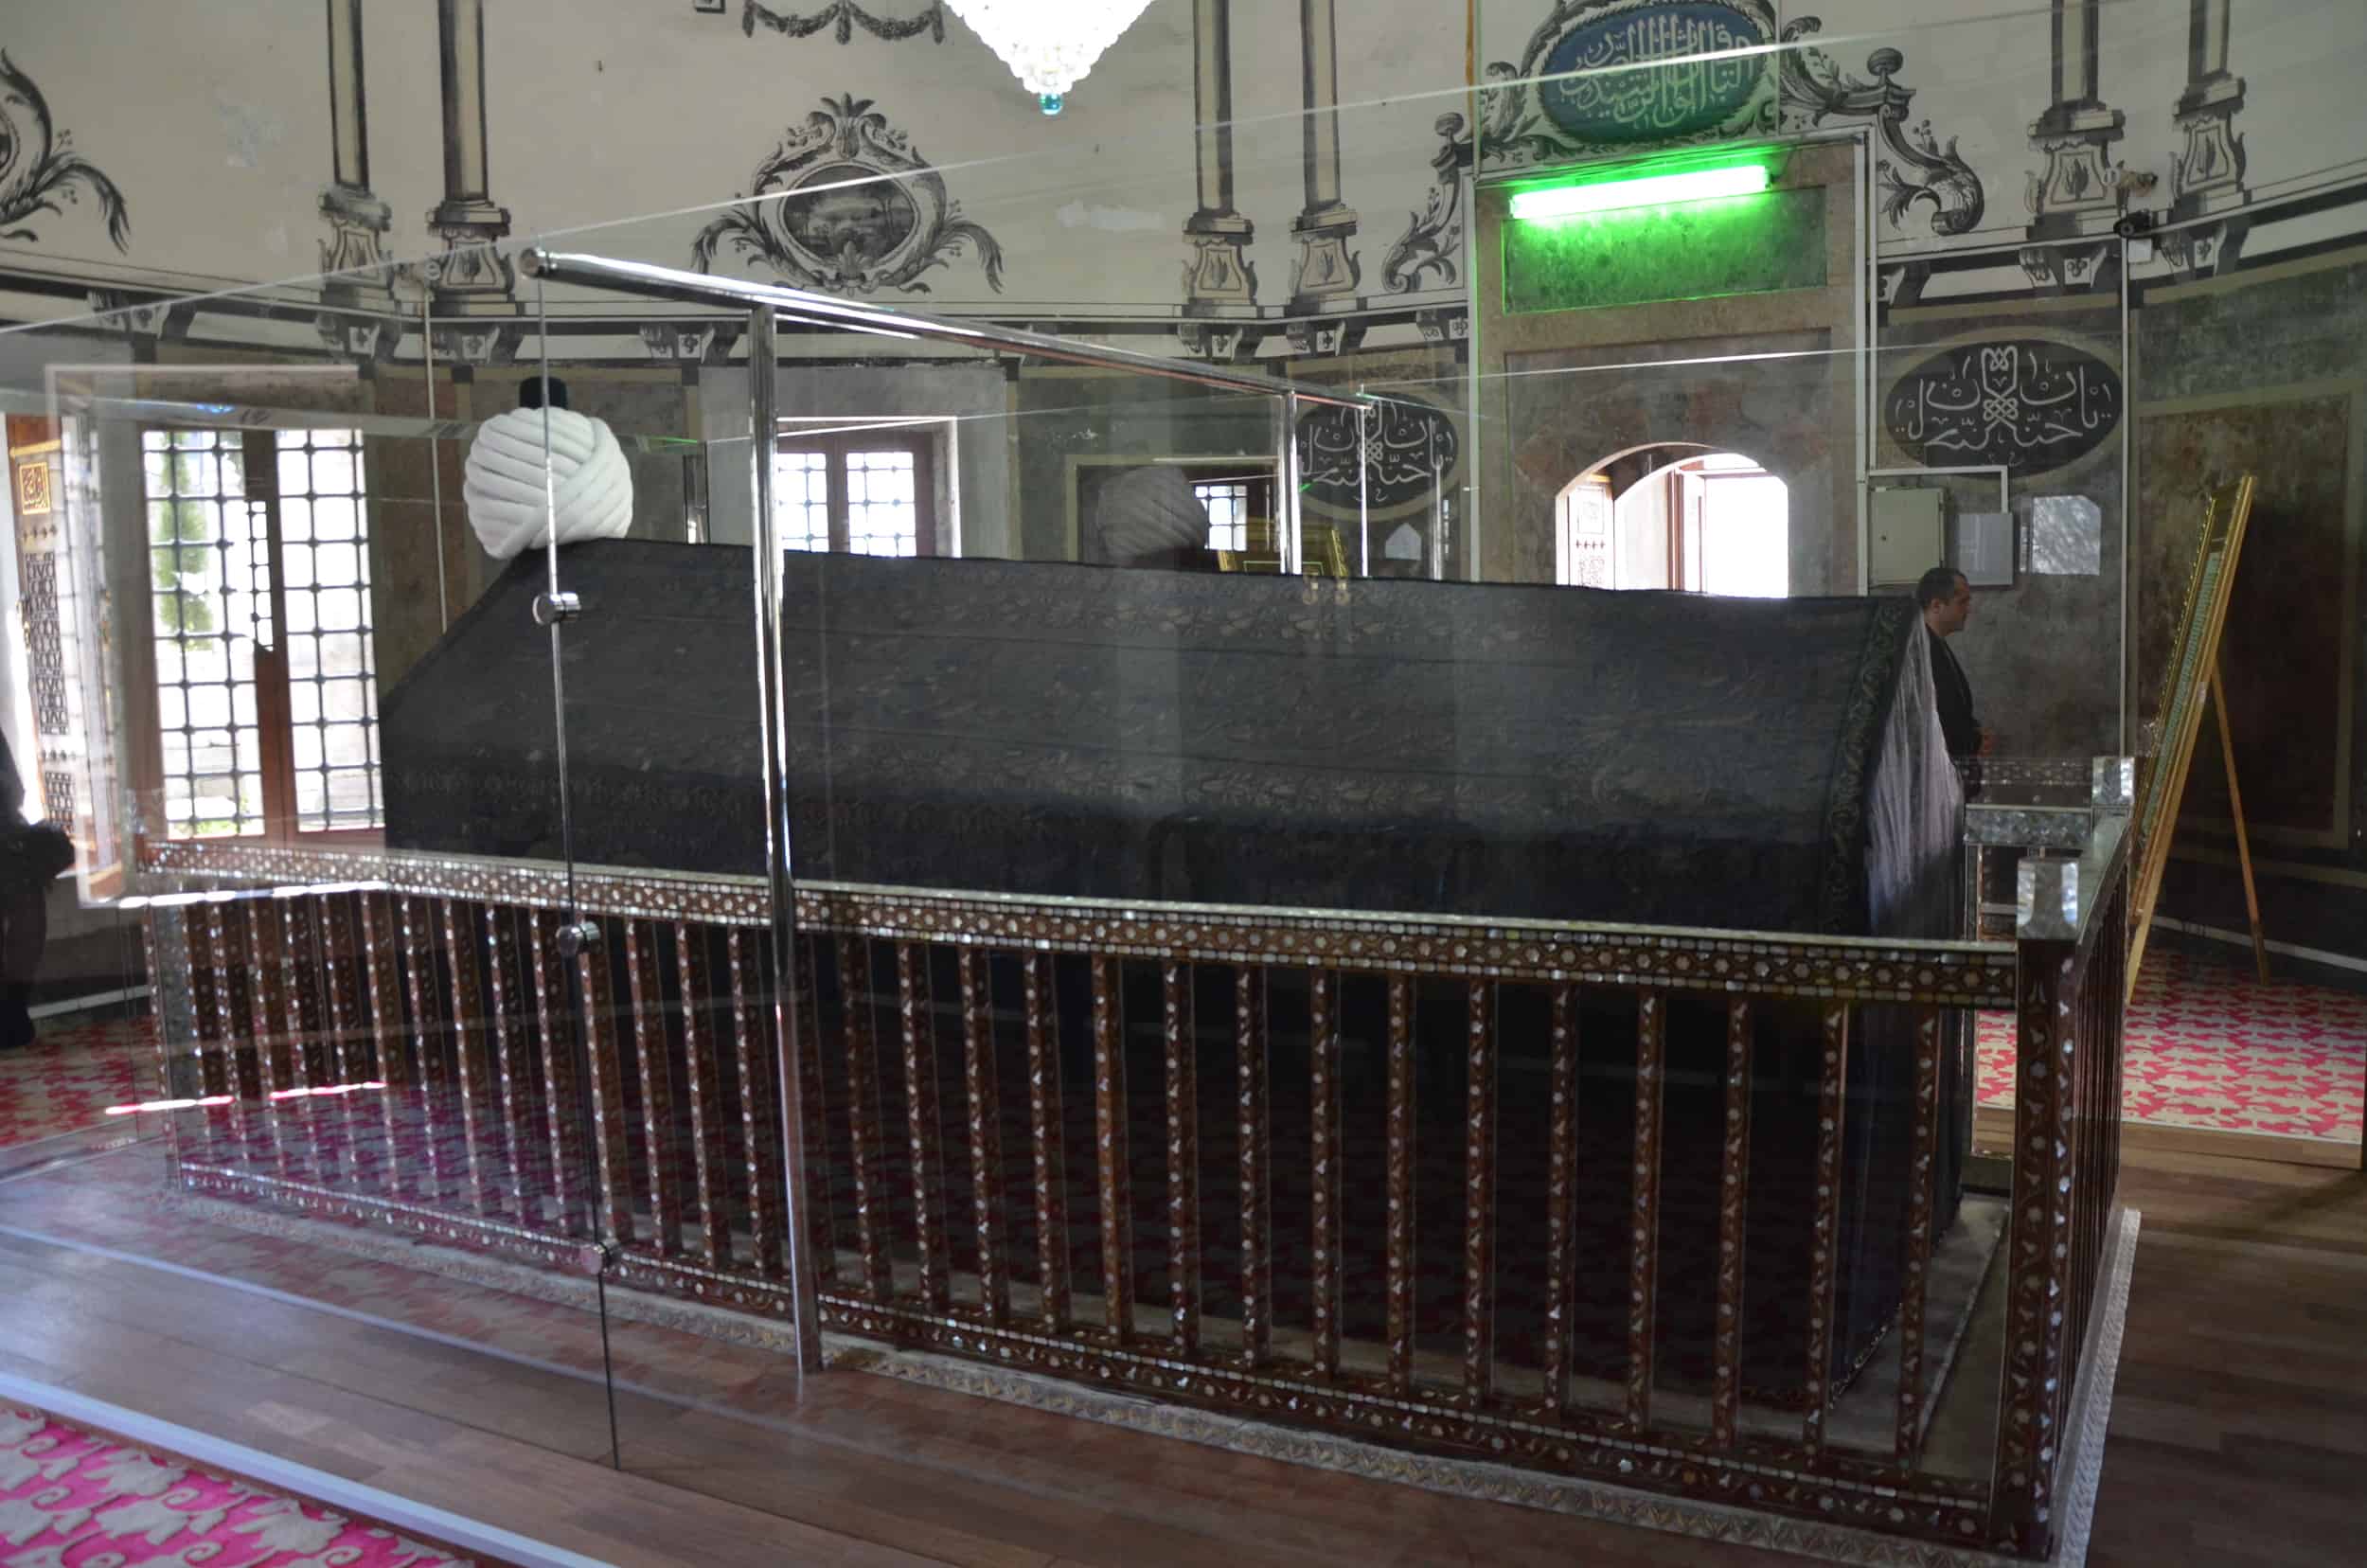 Tomb of Bayezid II at the Bayezid II Mosque in Istanbul, Turkey